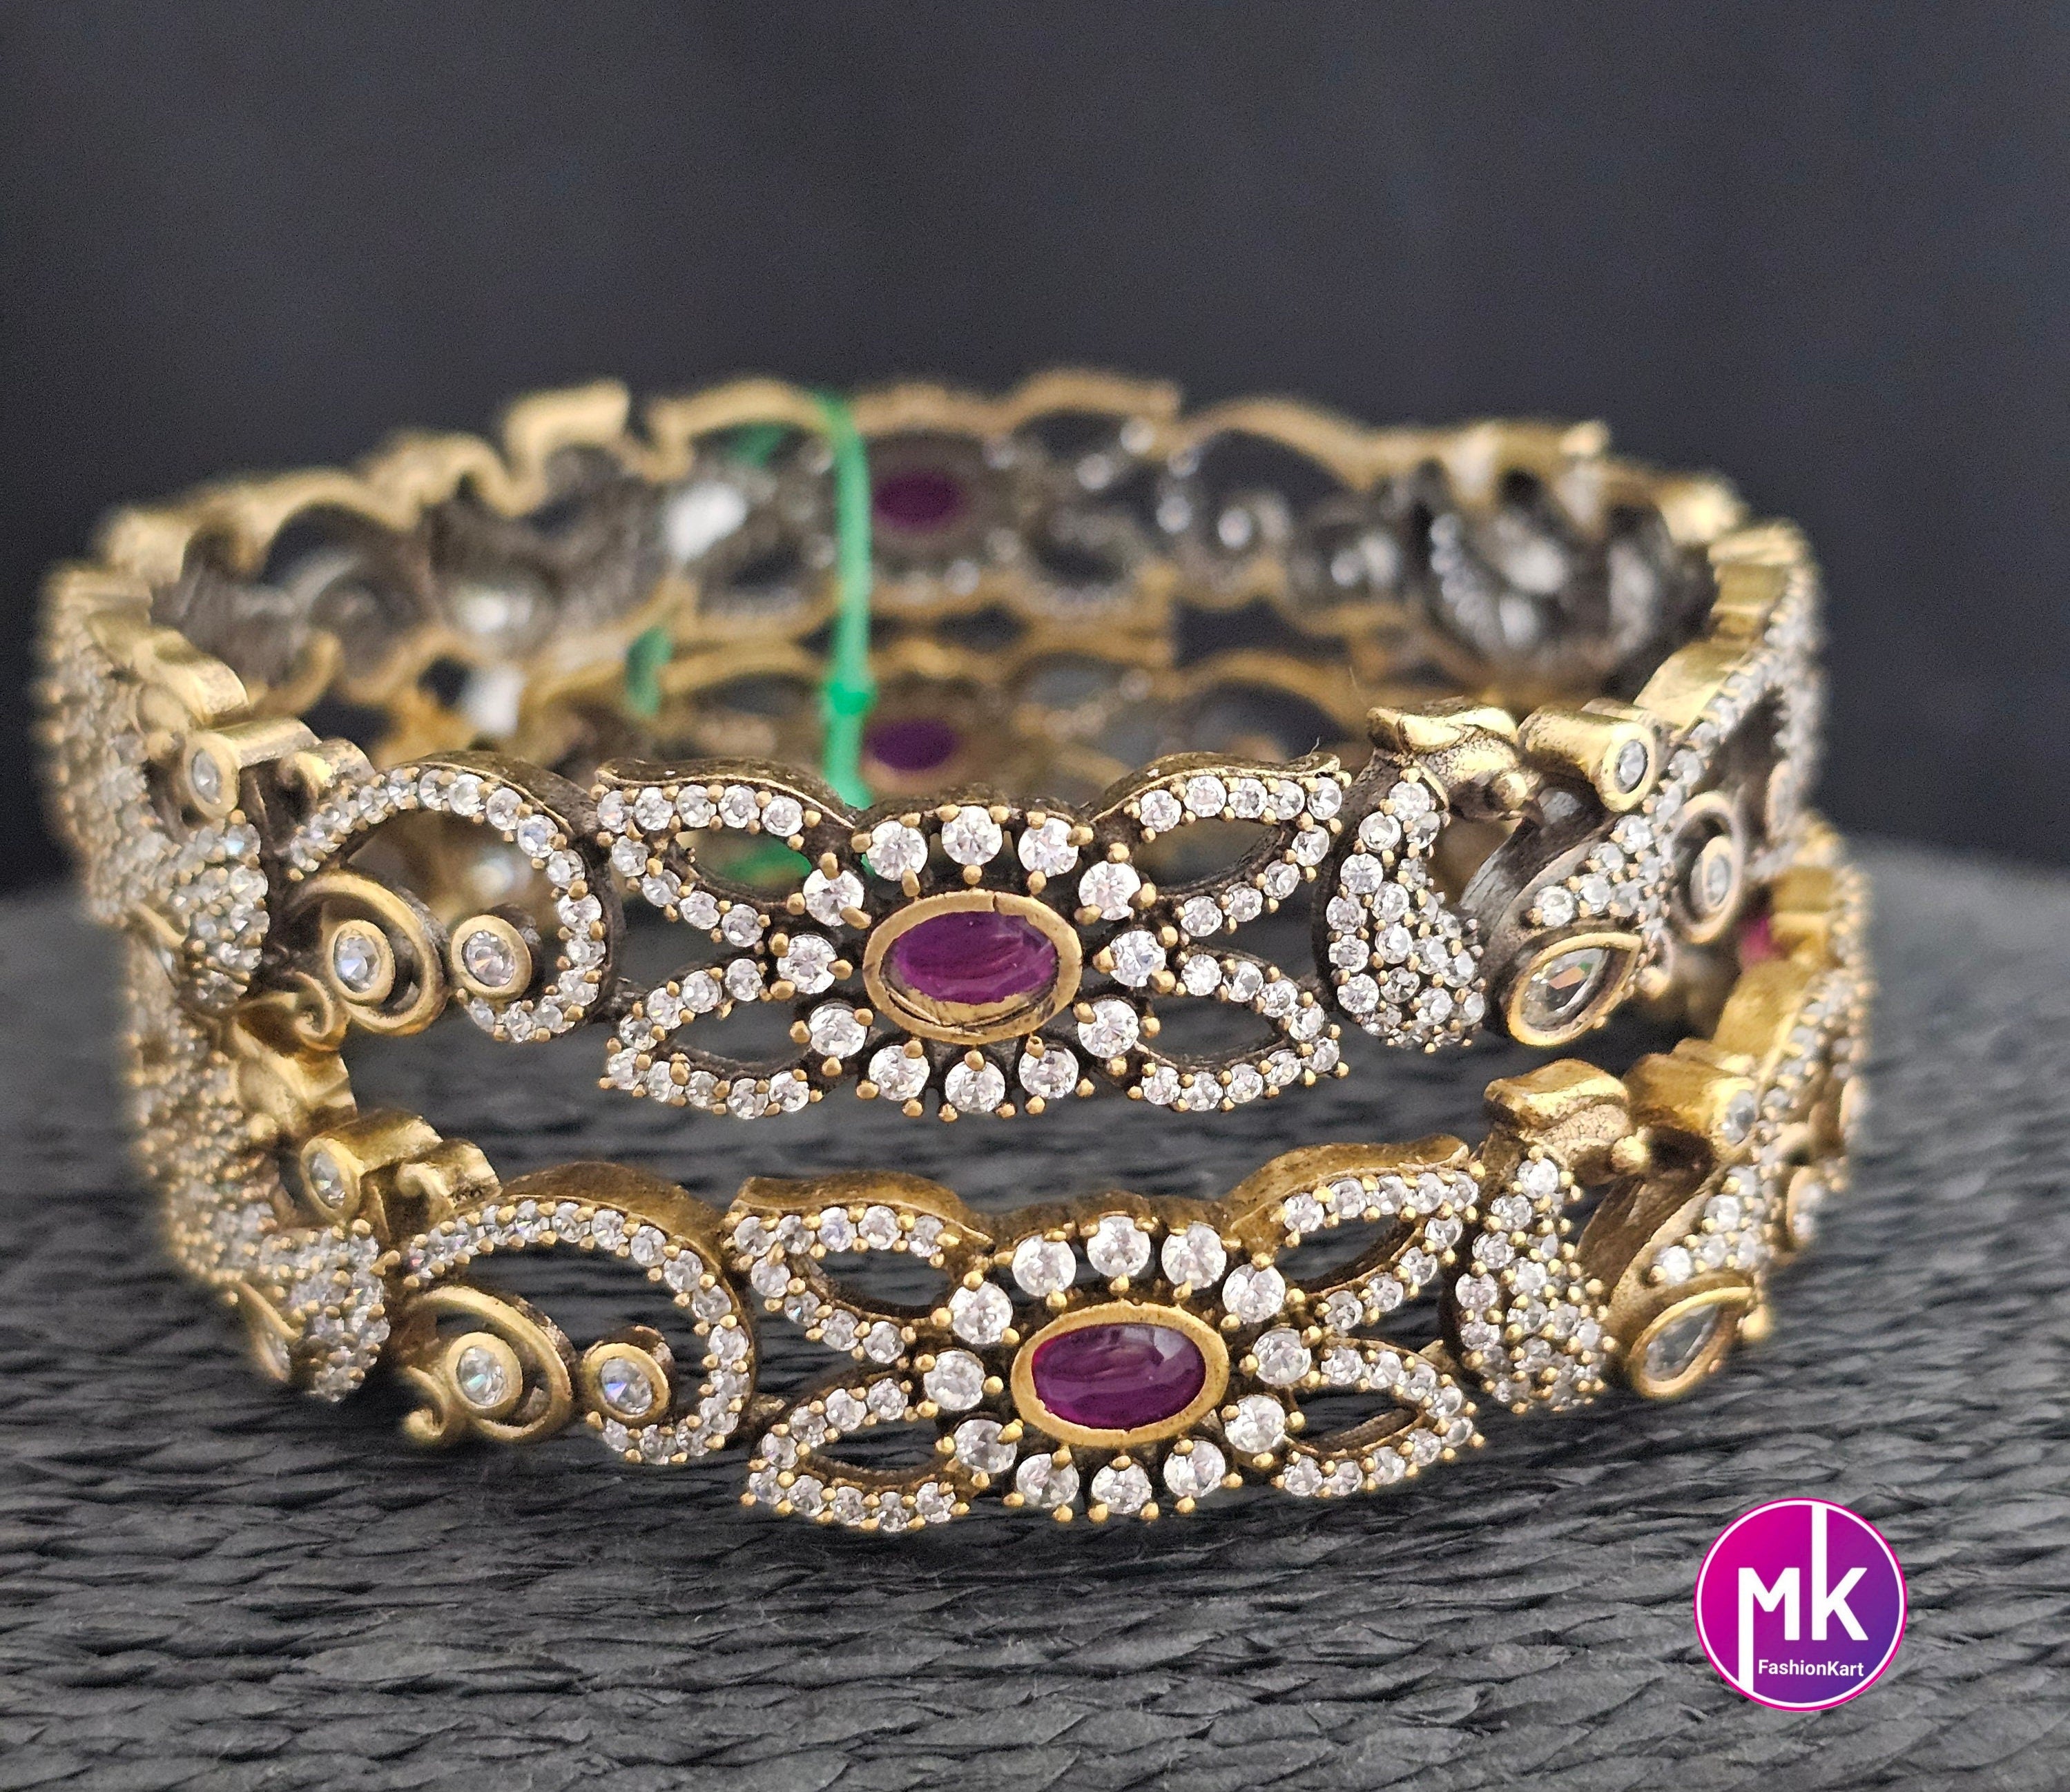 Victorian Bangle / Ethnic Bangles / Bollywood Jewelry / Floral and Peacock design Bangle - Set of 2 bangles - Size 2.6/2.8